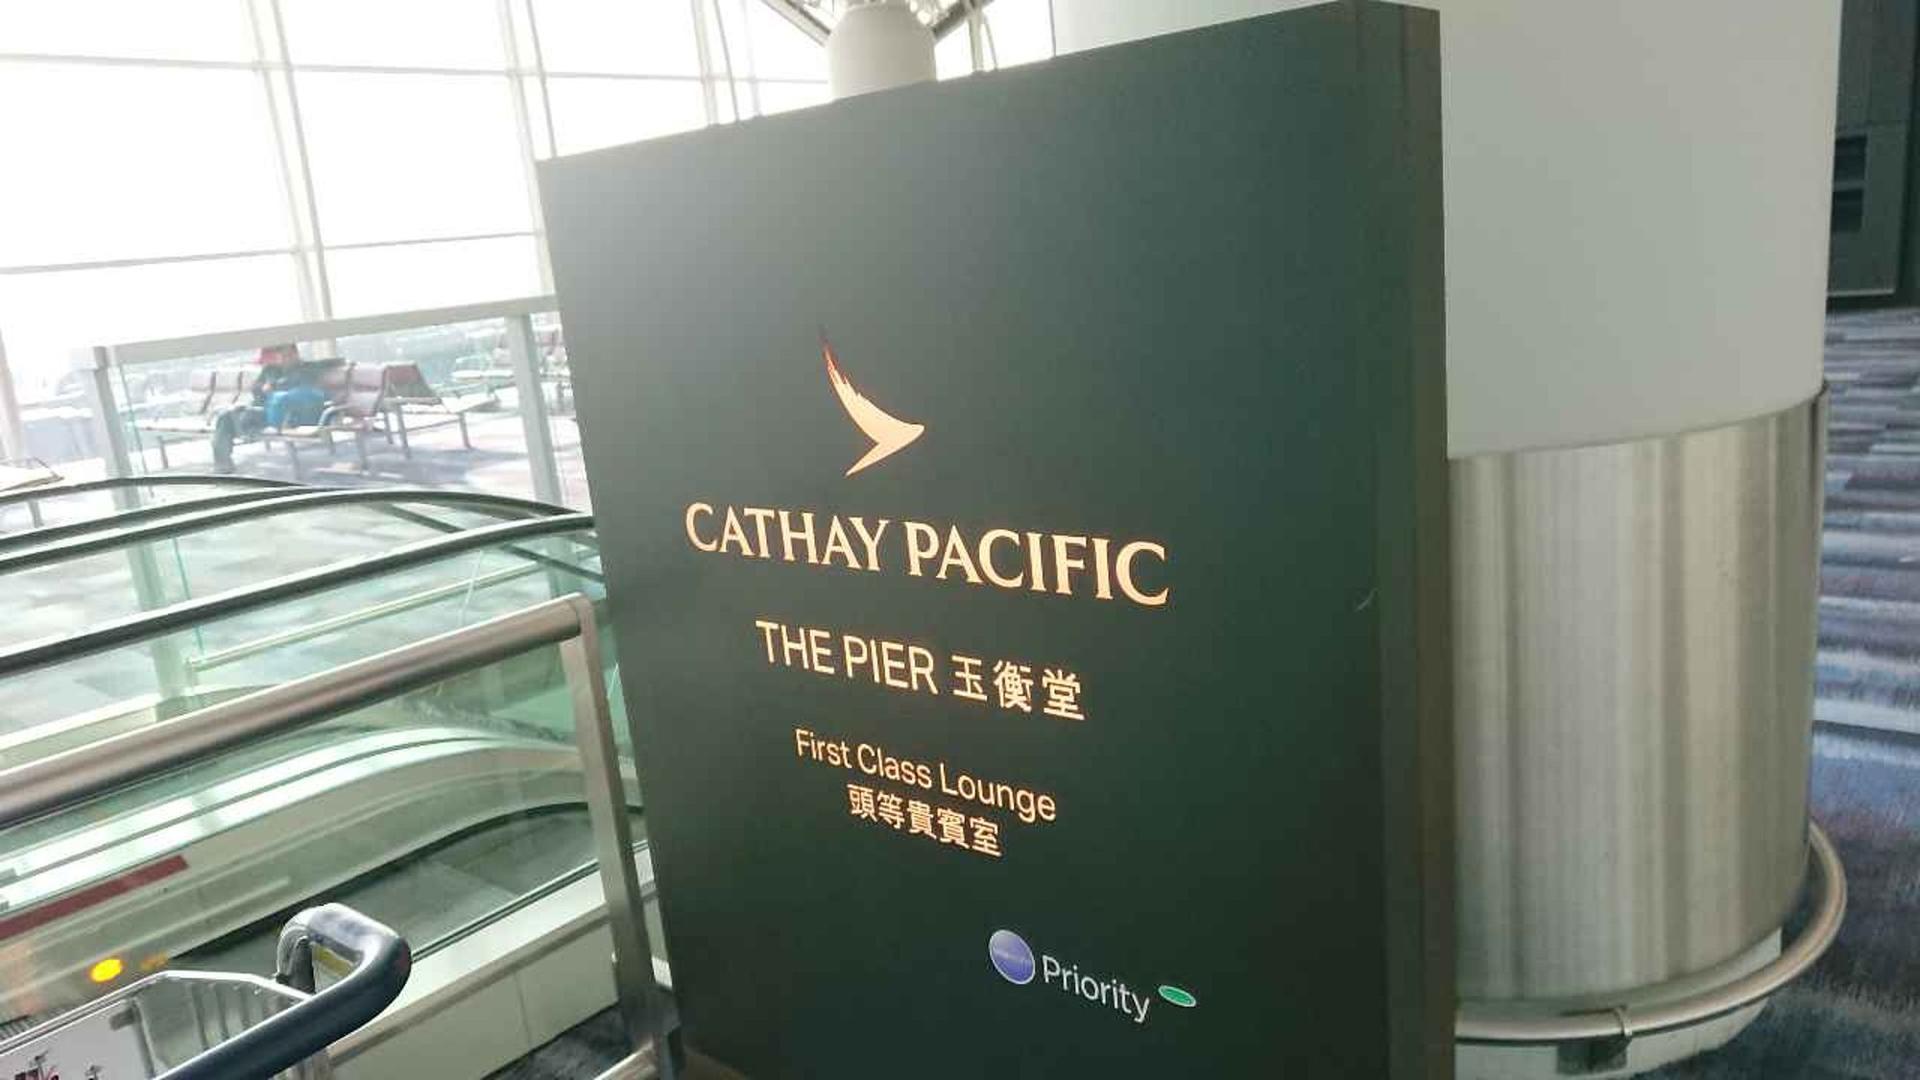 Cathay Pacific The Pier First Class Lounge image 50 of 100